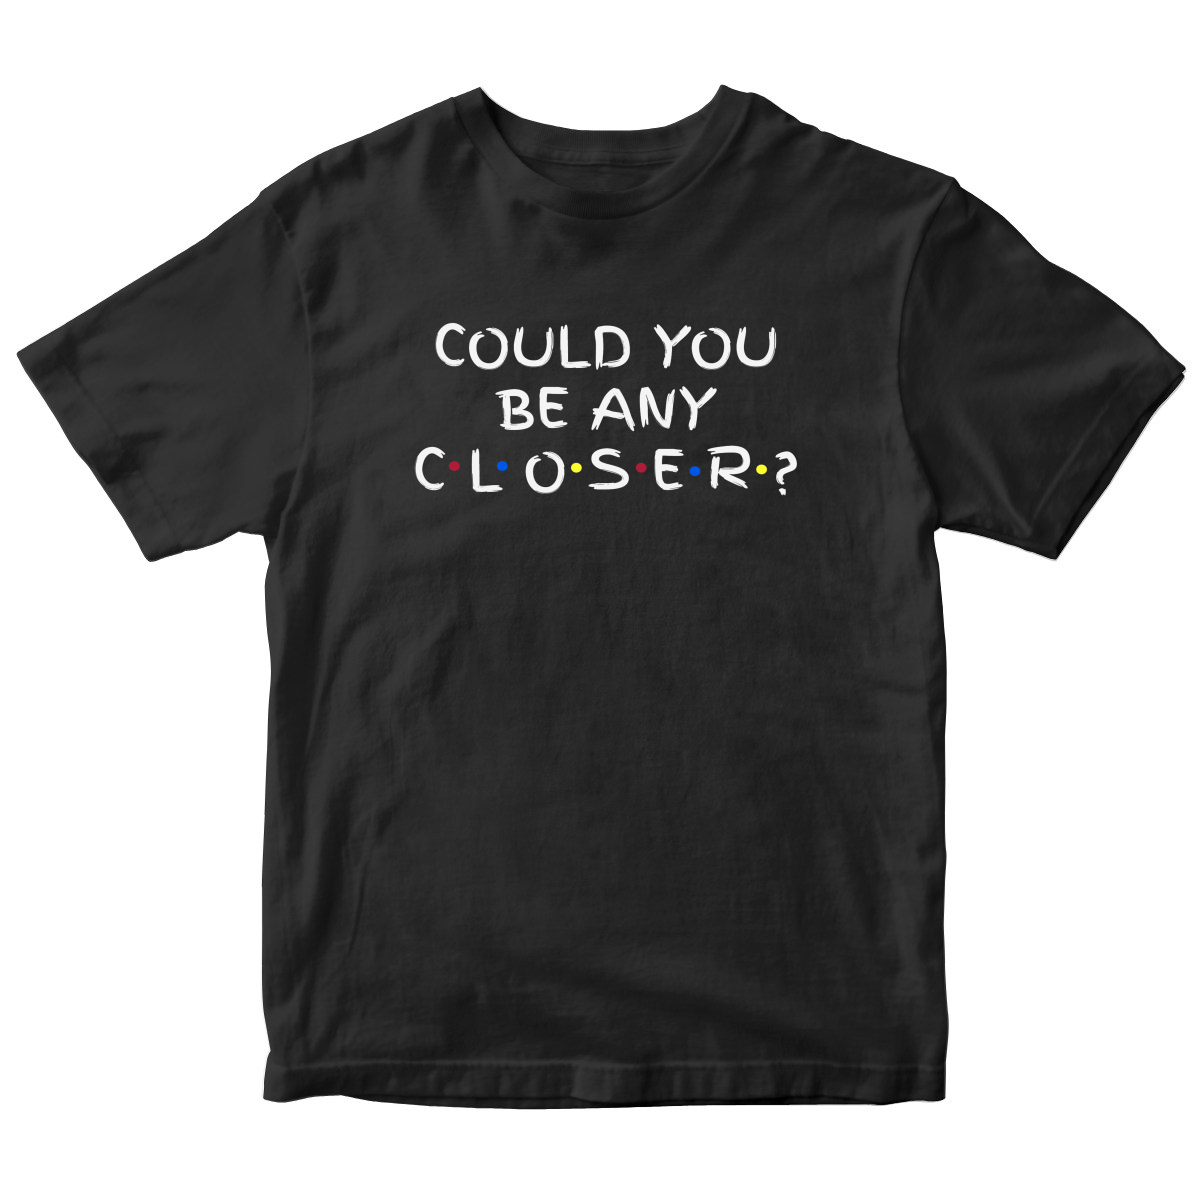 Could You Be Any Closer? Kids T-shirt | Black